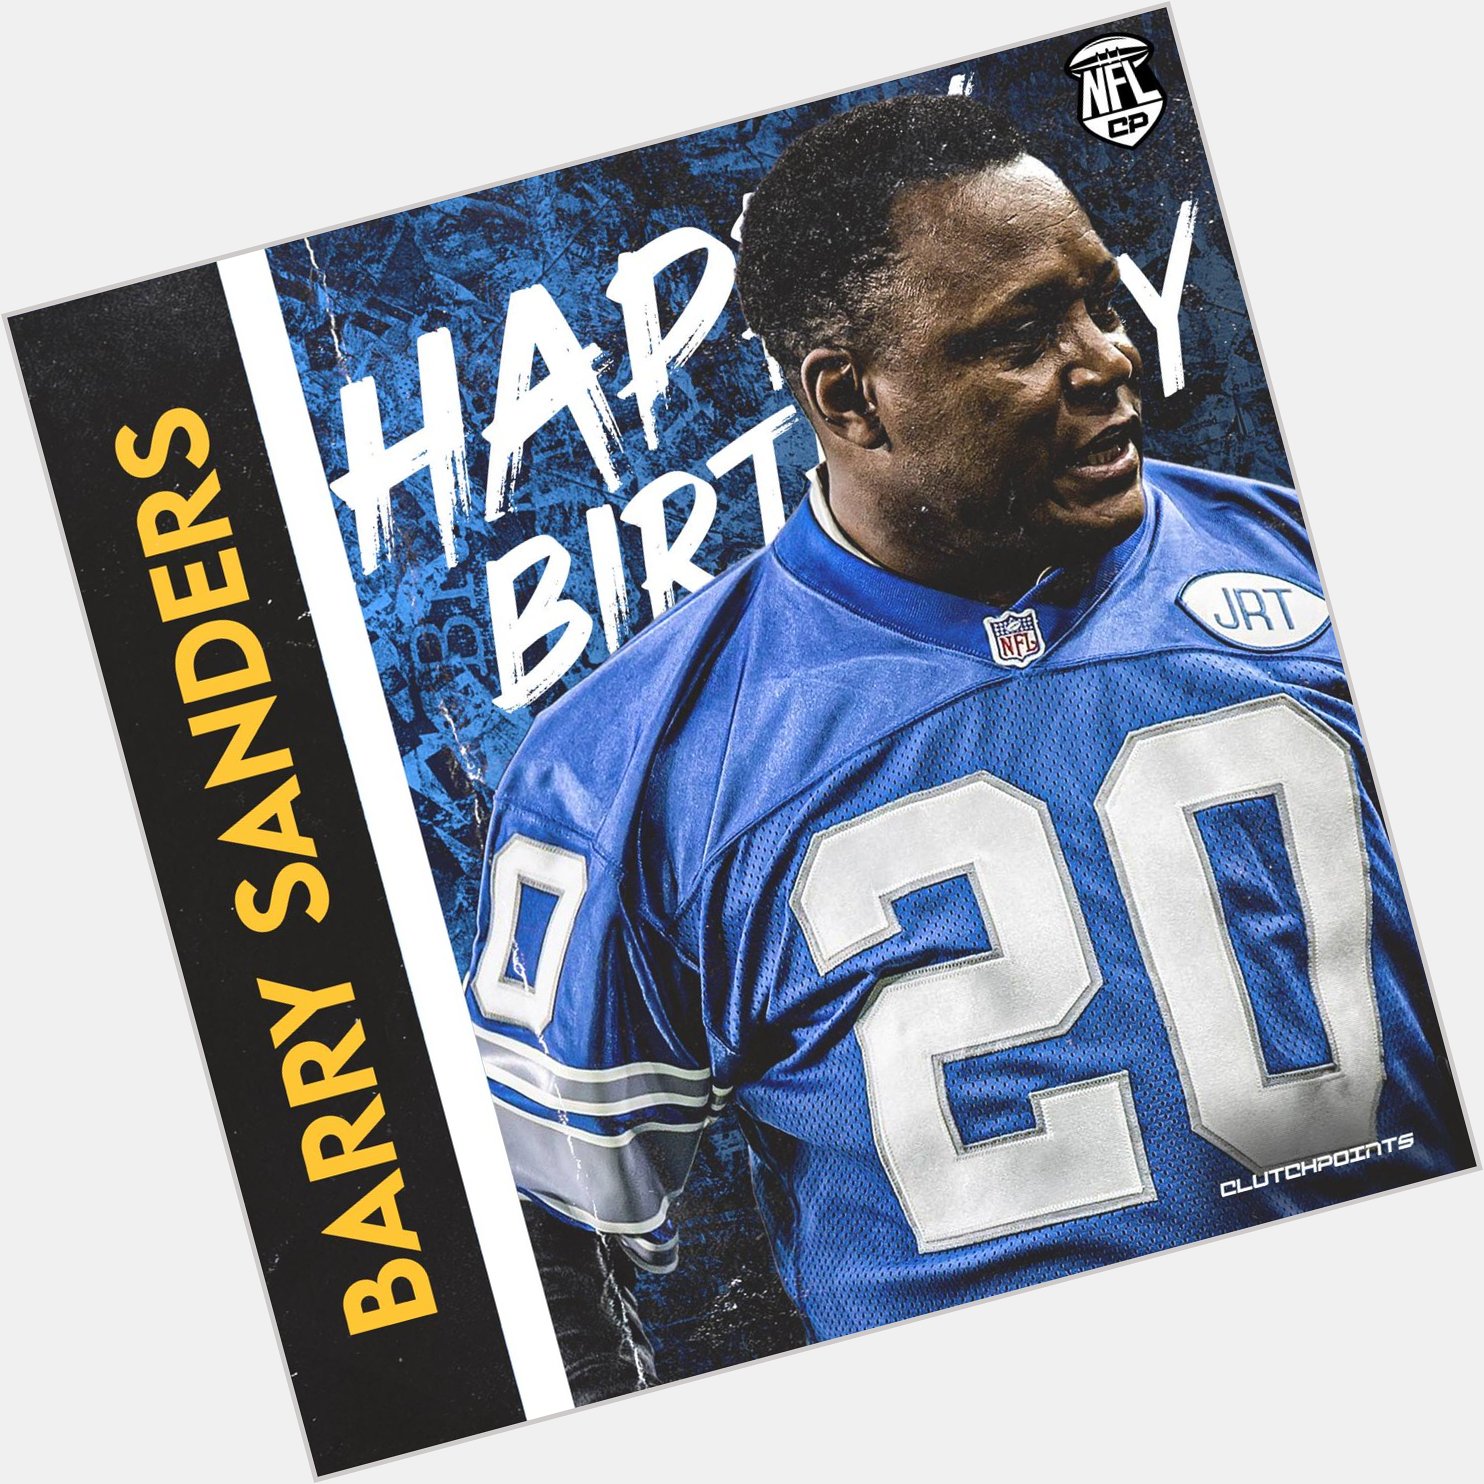 ClutchPoints NFL in wishing 10x Pro Bowler and Hall of Famer, Barry Sanders, a happy 53rd birthday!  